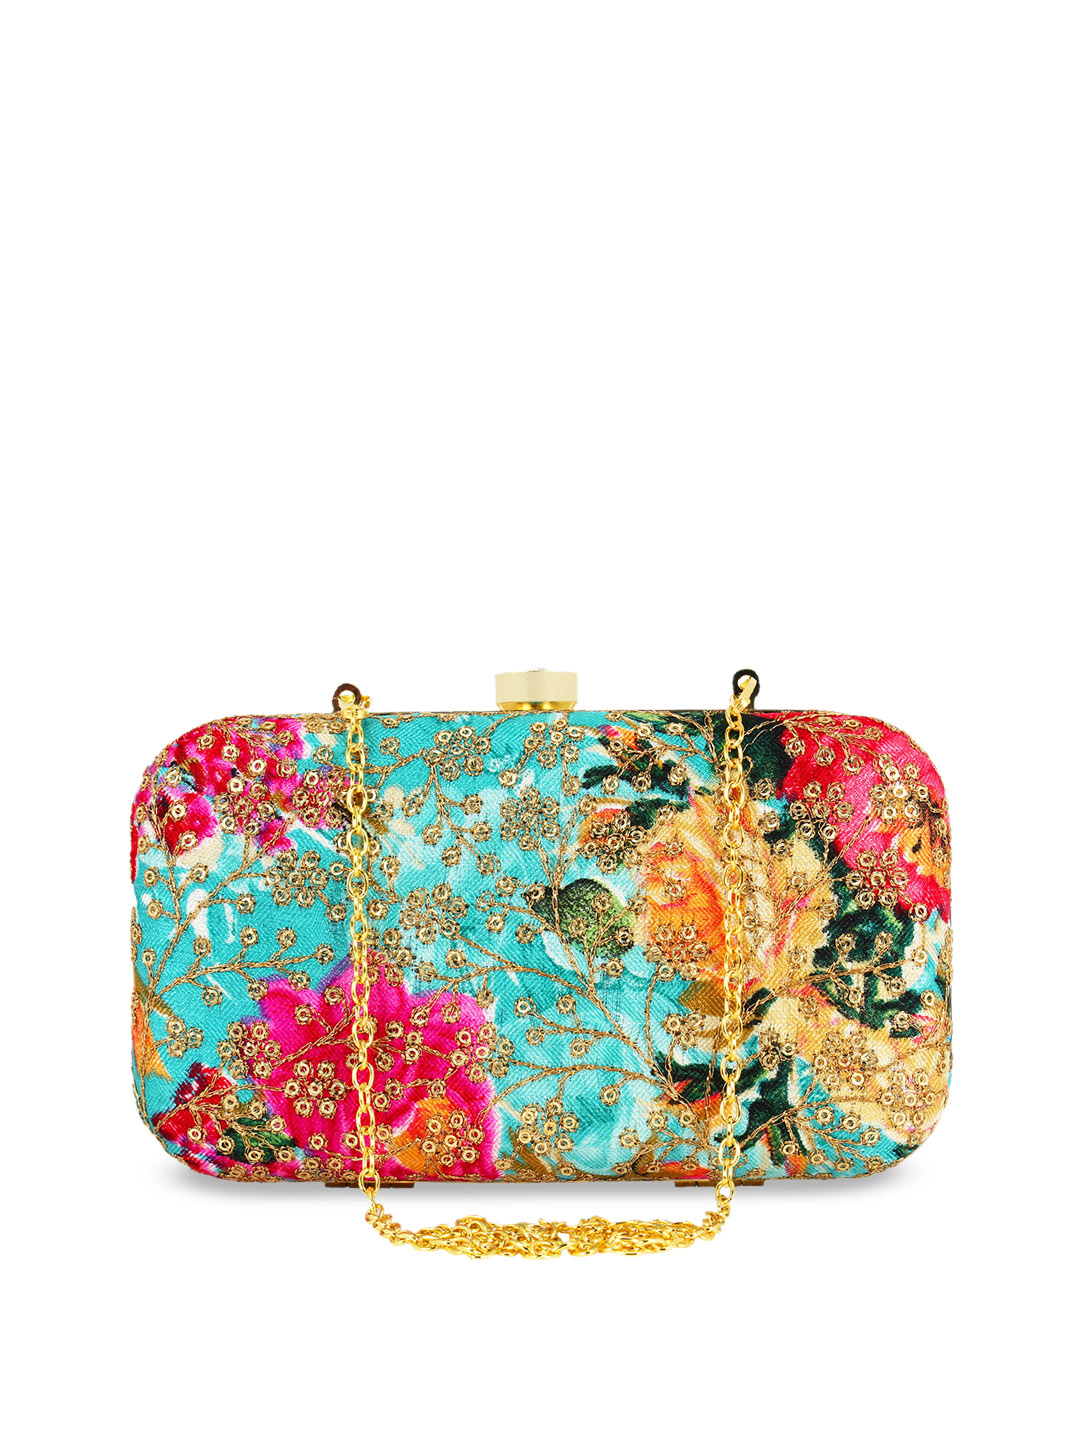 EMBROIDERED METAL FRAME CLUTCH